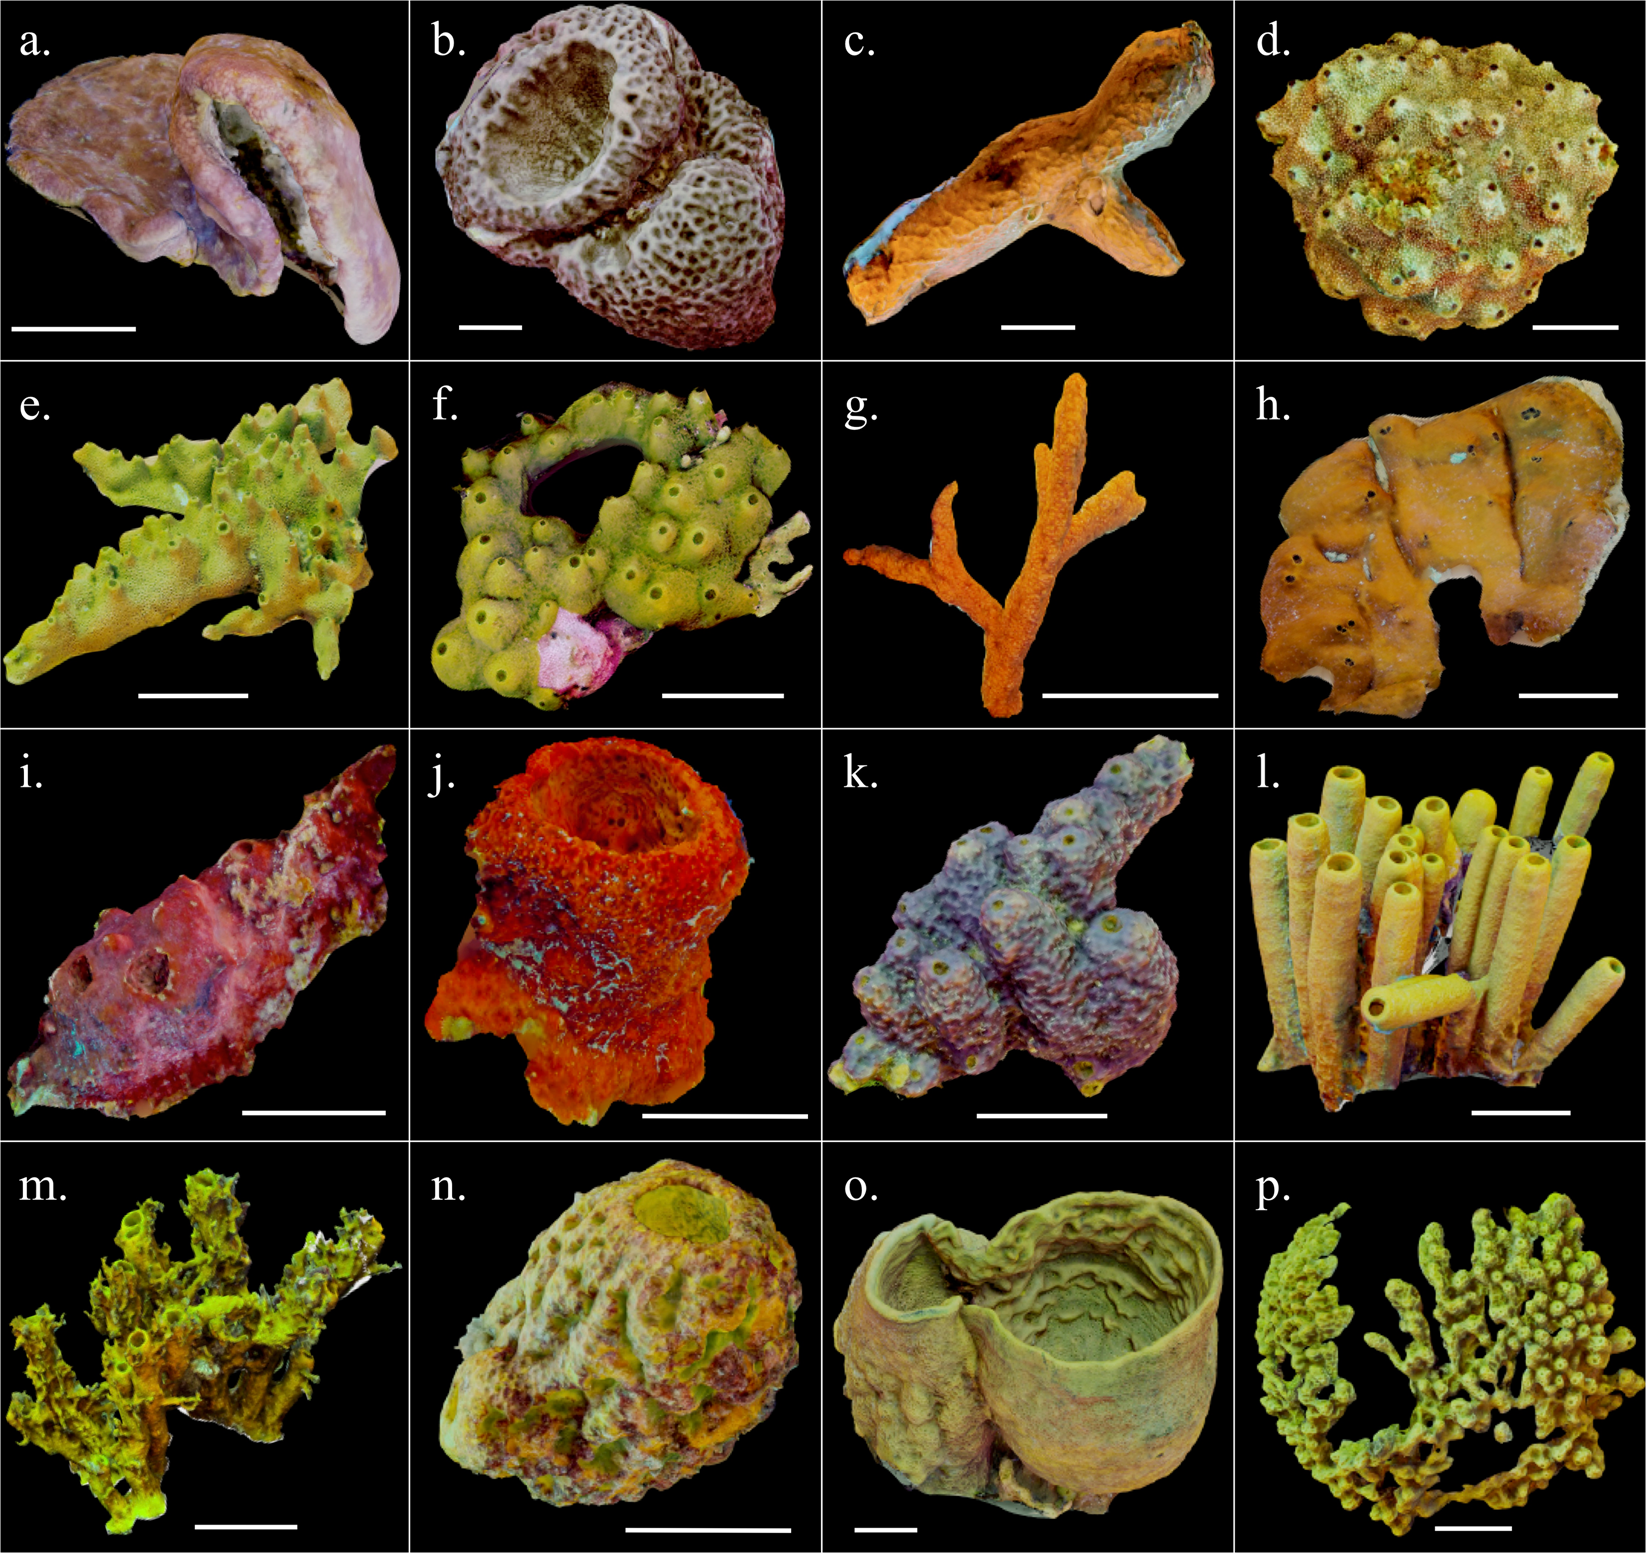 Growth estimates of Caribbean reef sponges on a shipwreck using 3D